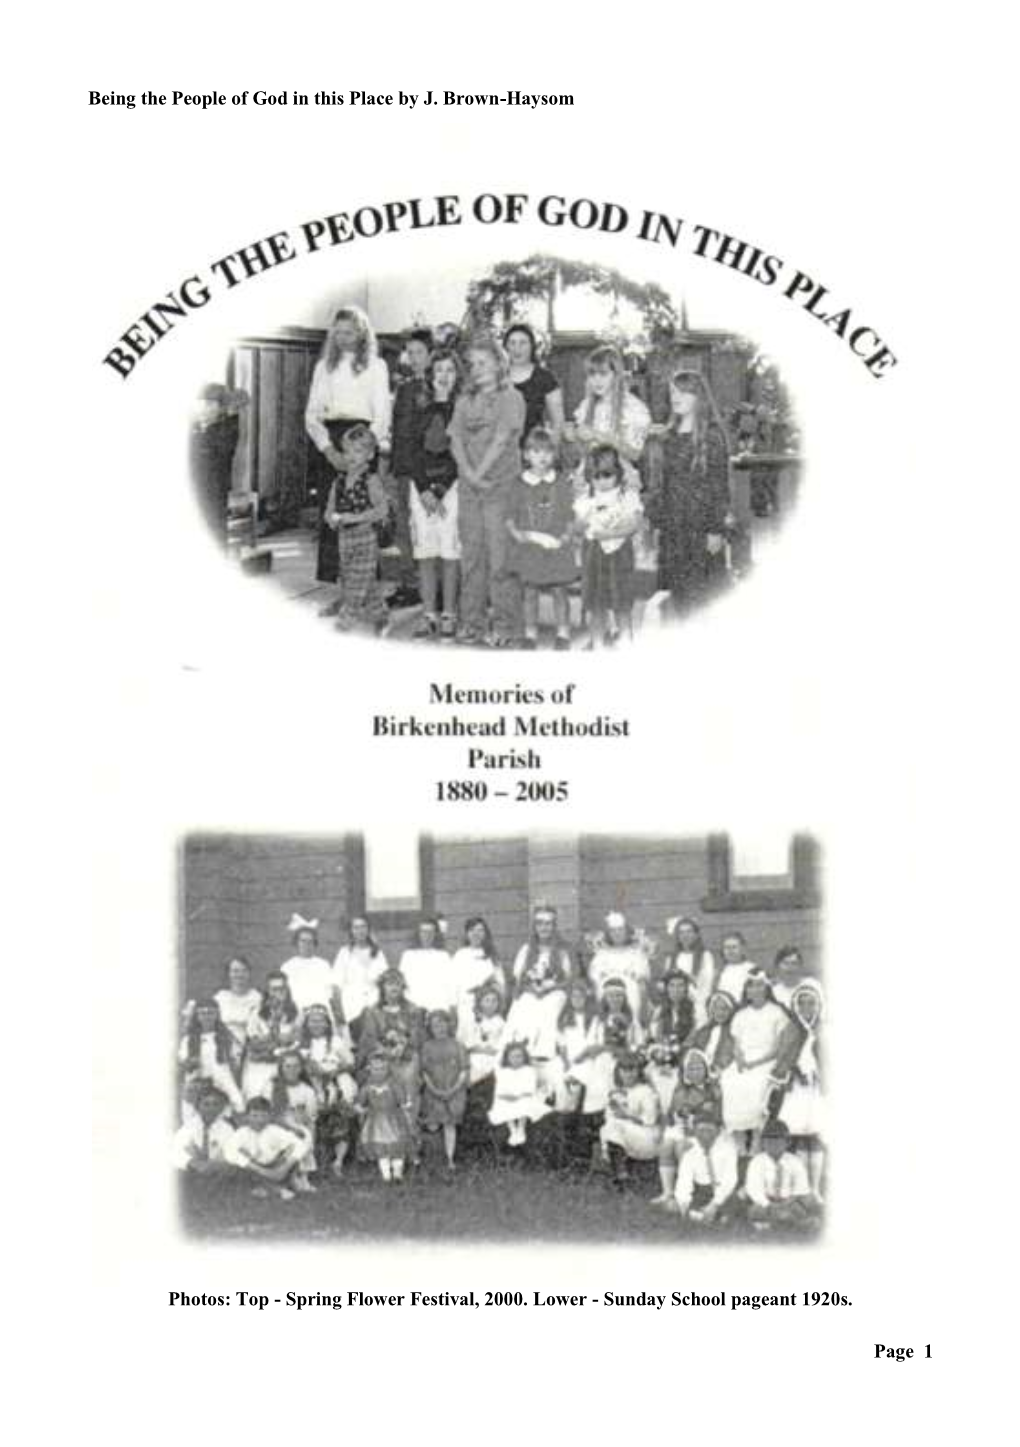 Being the People of God in This Place by J. Brown-Haysom Page 1 Photos